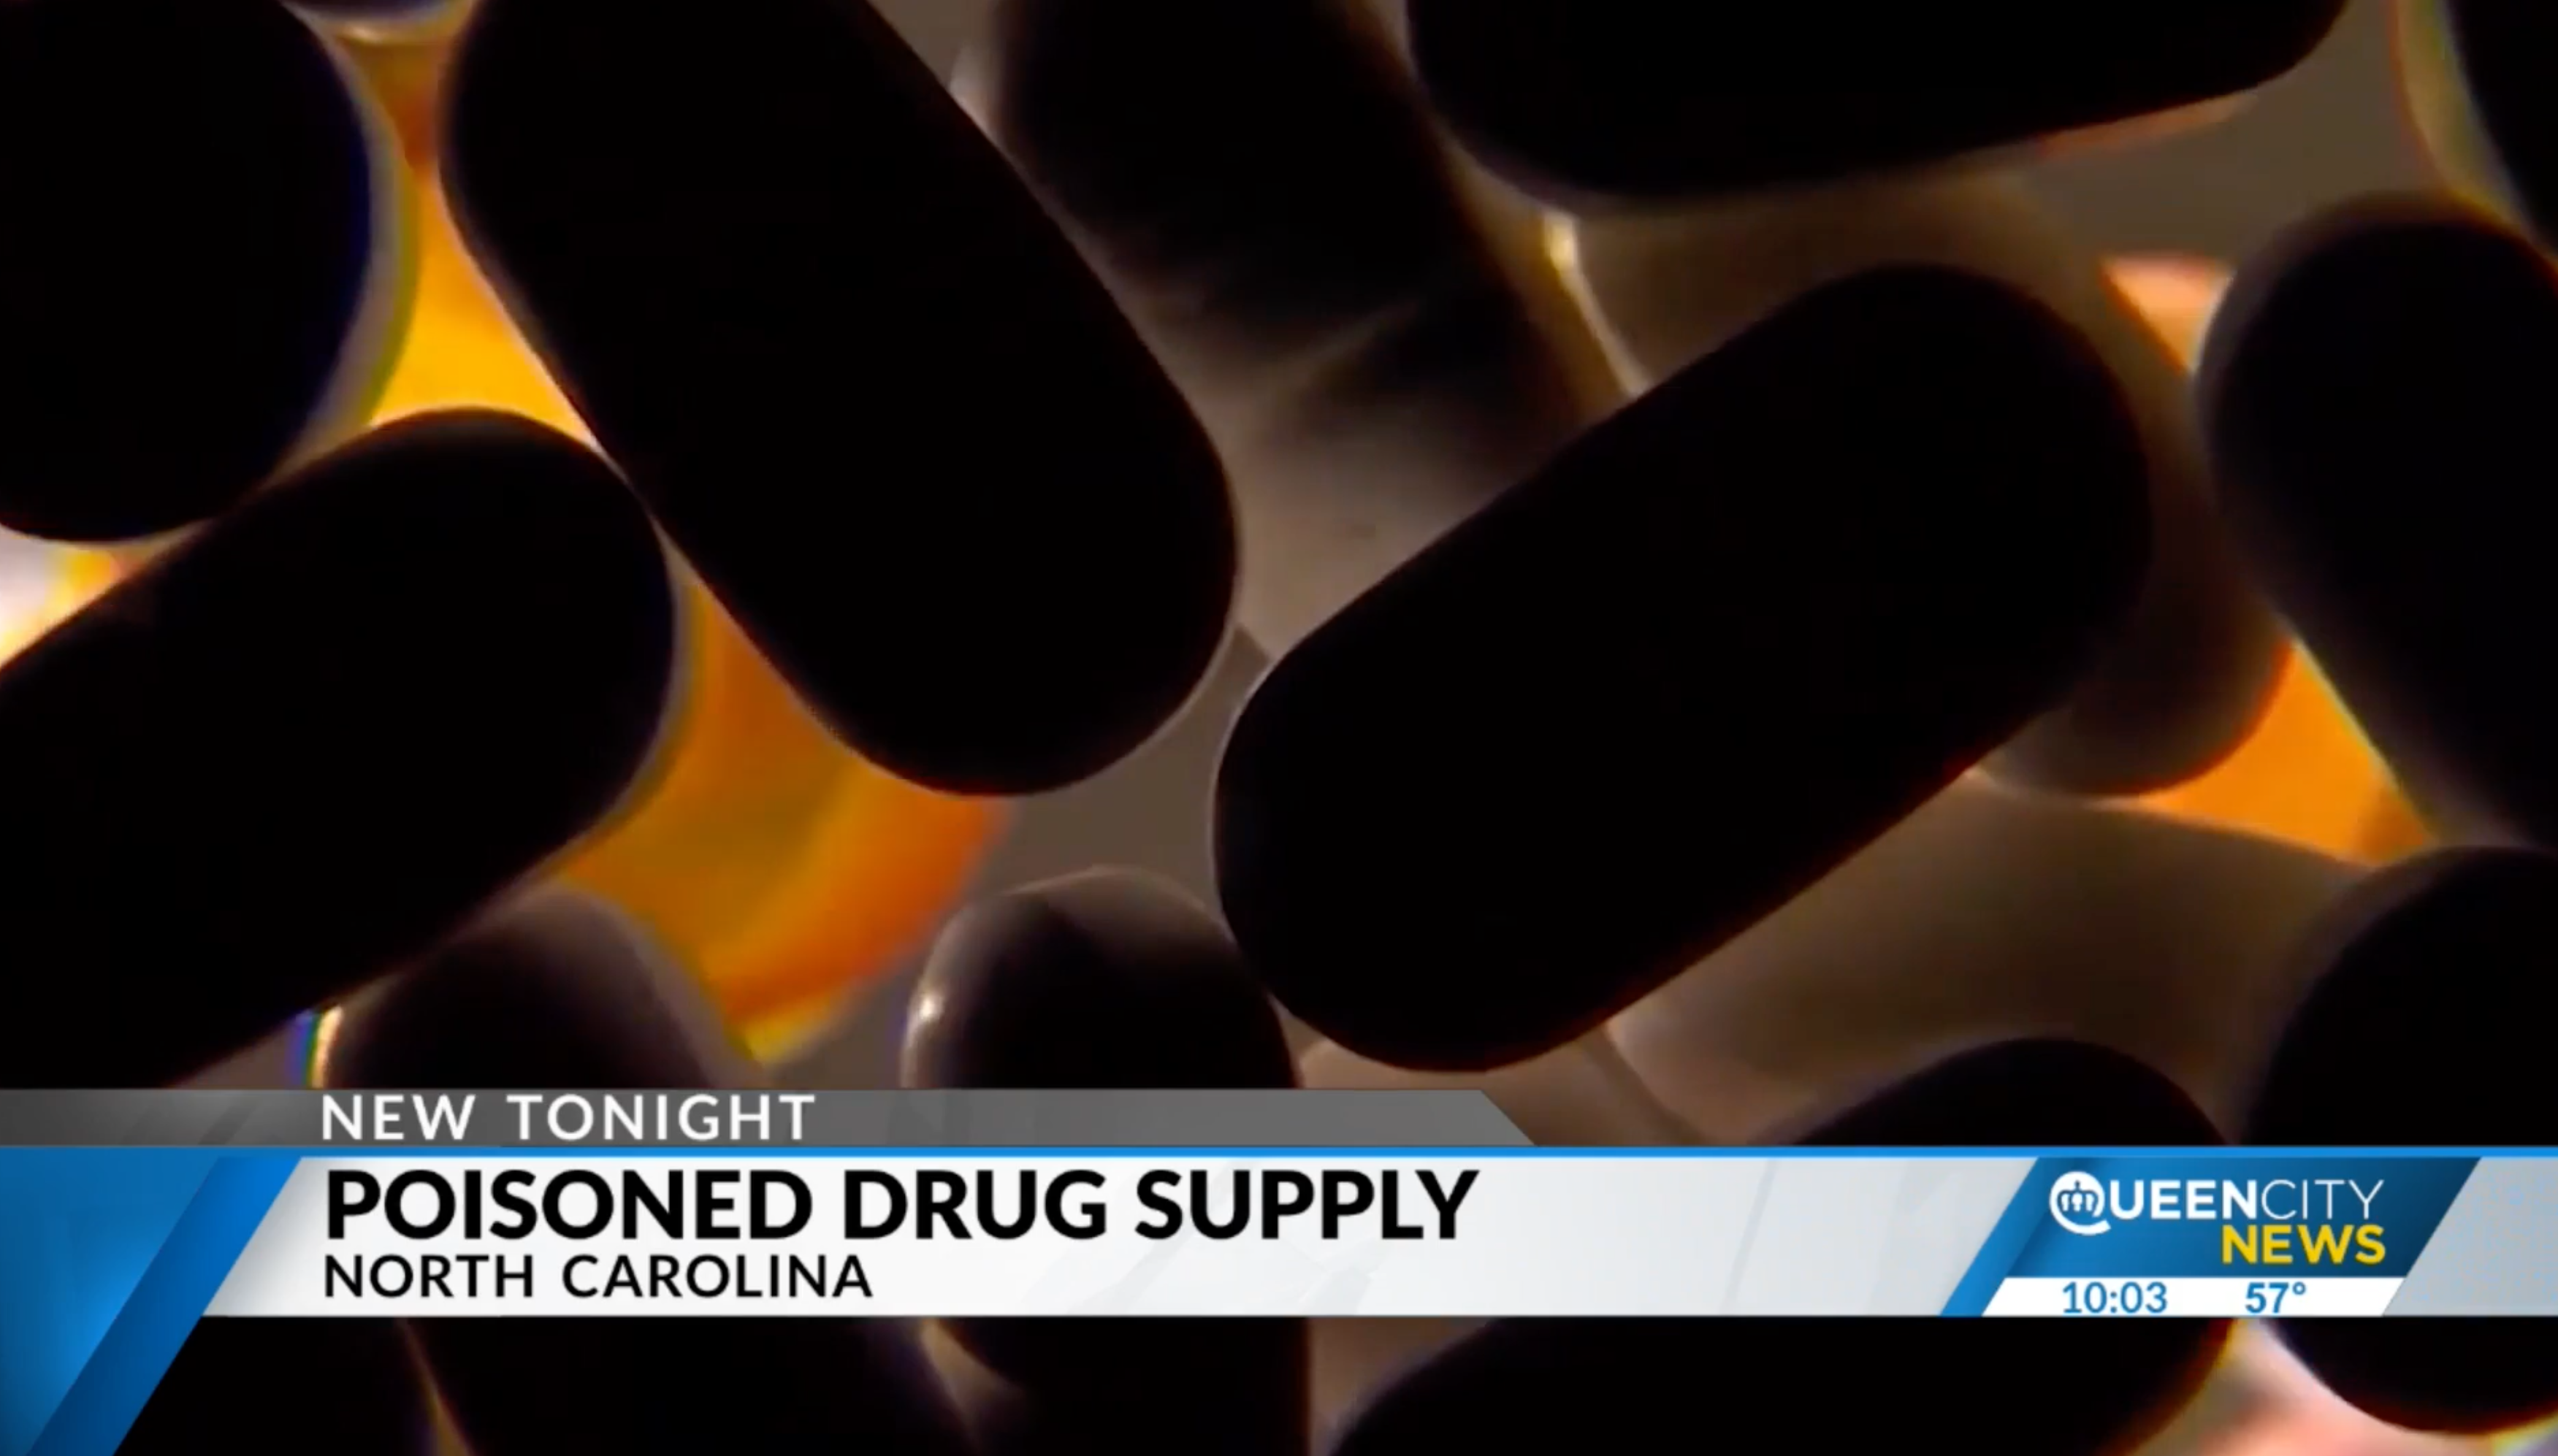 How fentanyl is poisoning the drug supply in NC￼